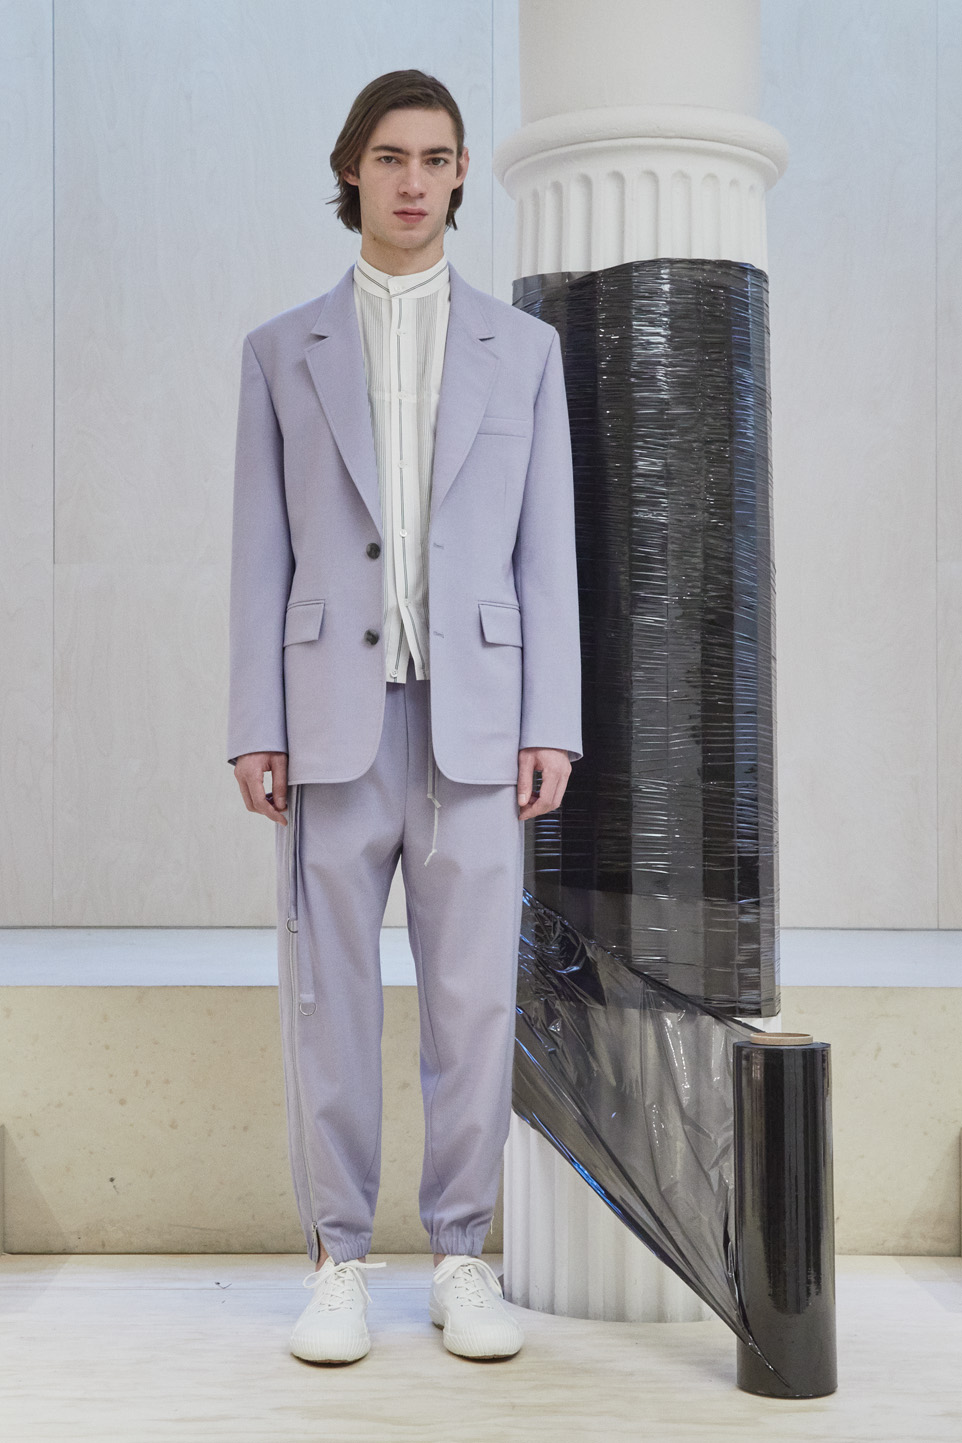 Plim FW19 Mens Collections Lores 30 3.1 phillip lim fall 2019